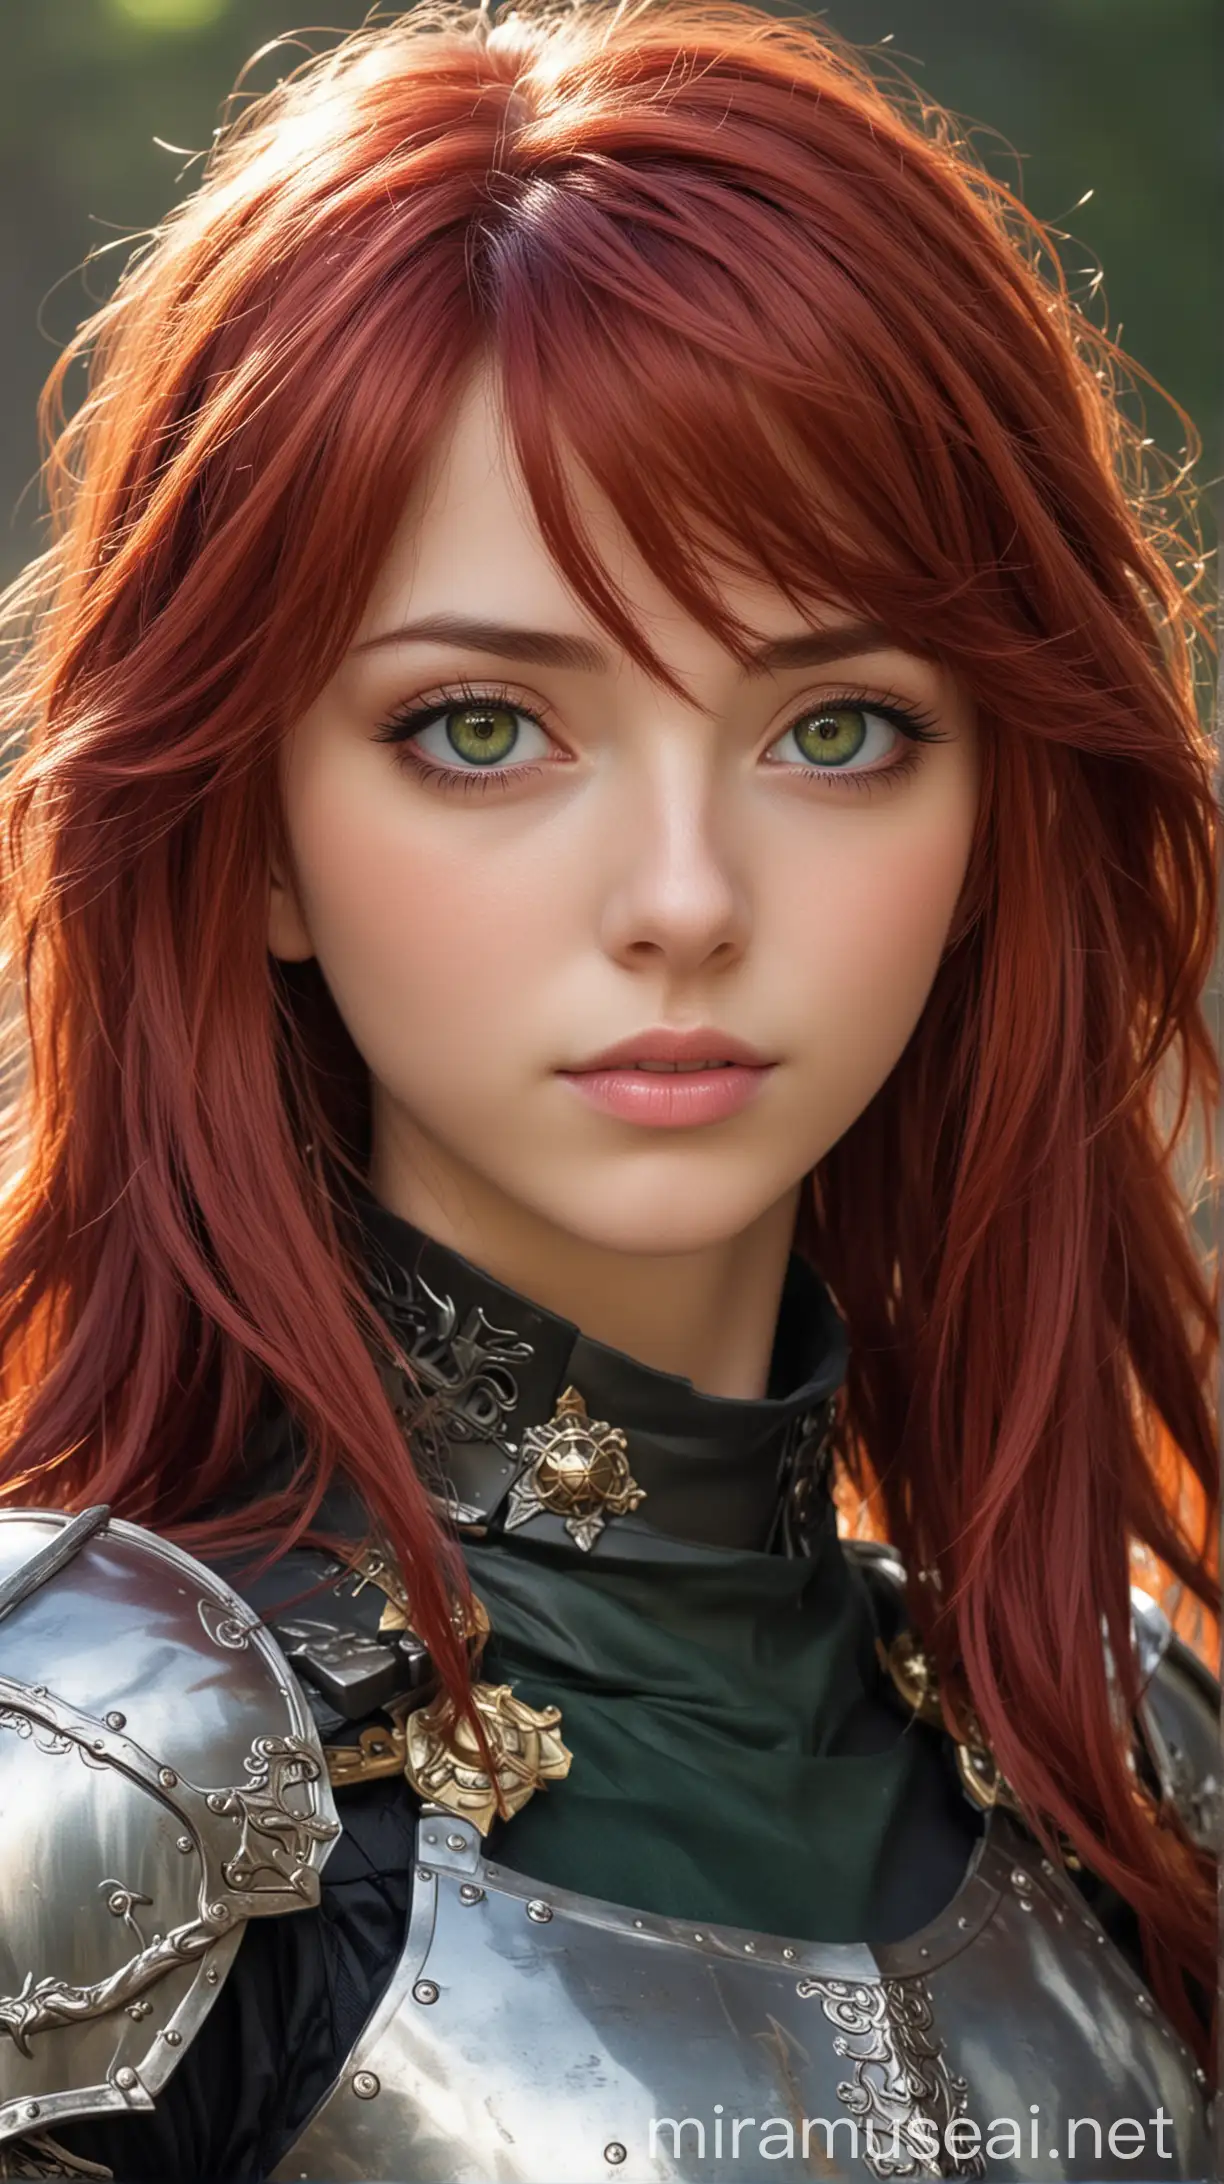 Tranquil Anime Knight Young Woman in Cherry Red Hair and Knights Armor